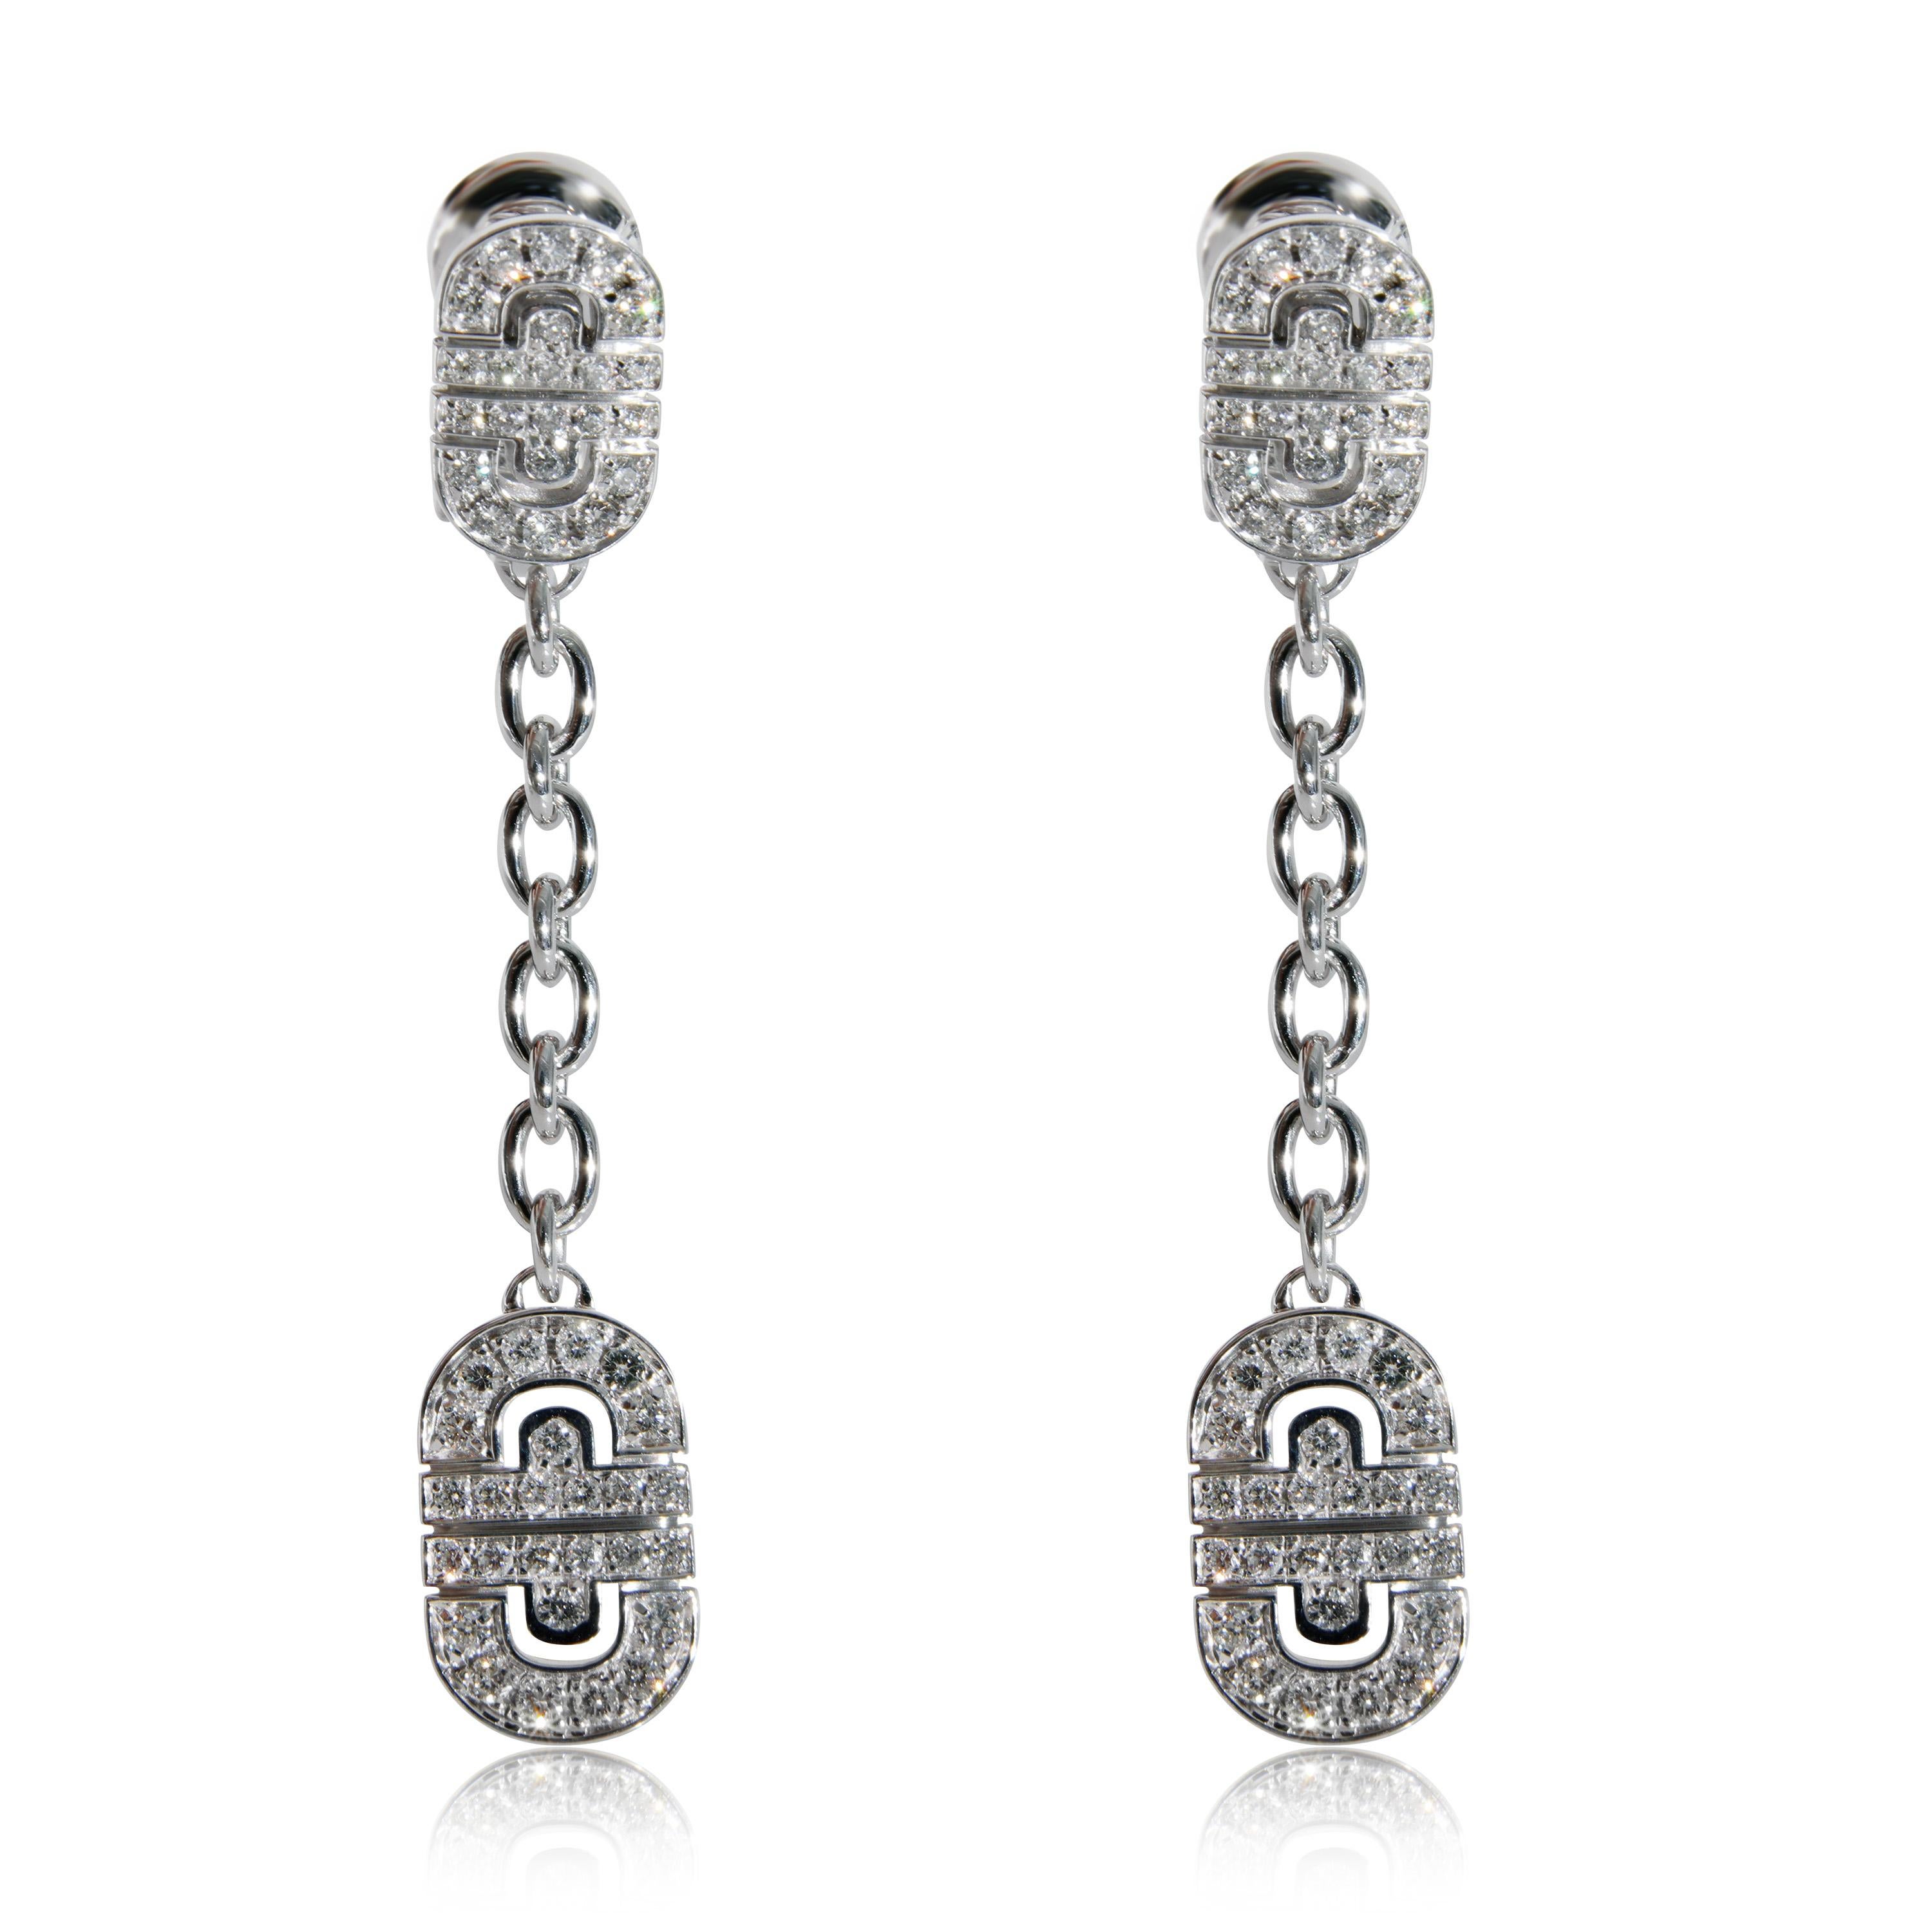 BVLGARI Parentesi Diamond Earrings in 18k White Gold 1.15 CTW

PRIMARY DETAILS
SKU: 130737
Listing Title: BVLGARI Parentesi Diamond Earrings in 18k White Gold 1.15 CTW
Condition Description: Retails for 11000 USD. In excellent condition and recently